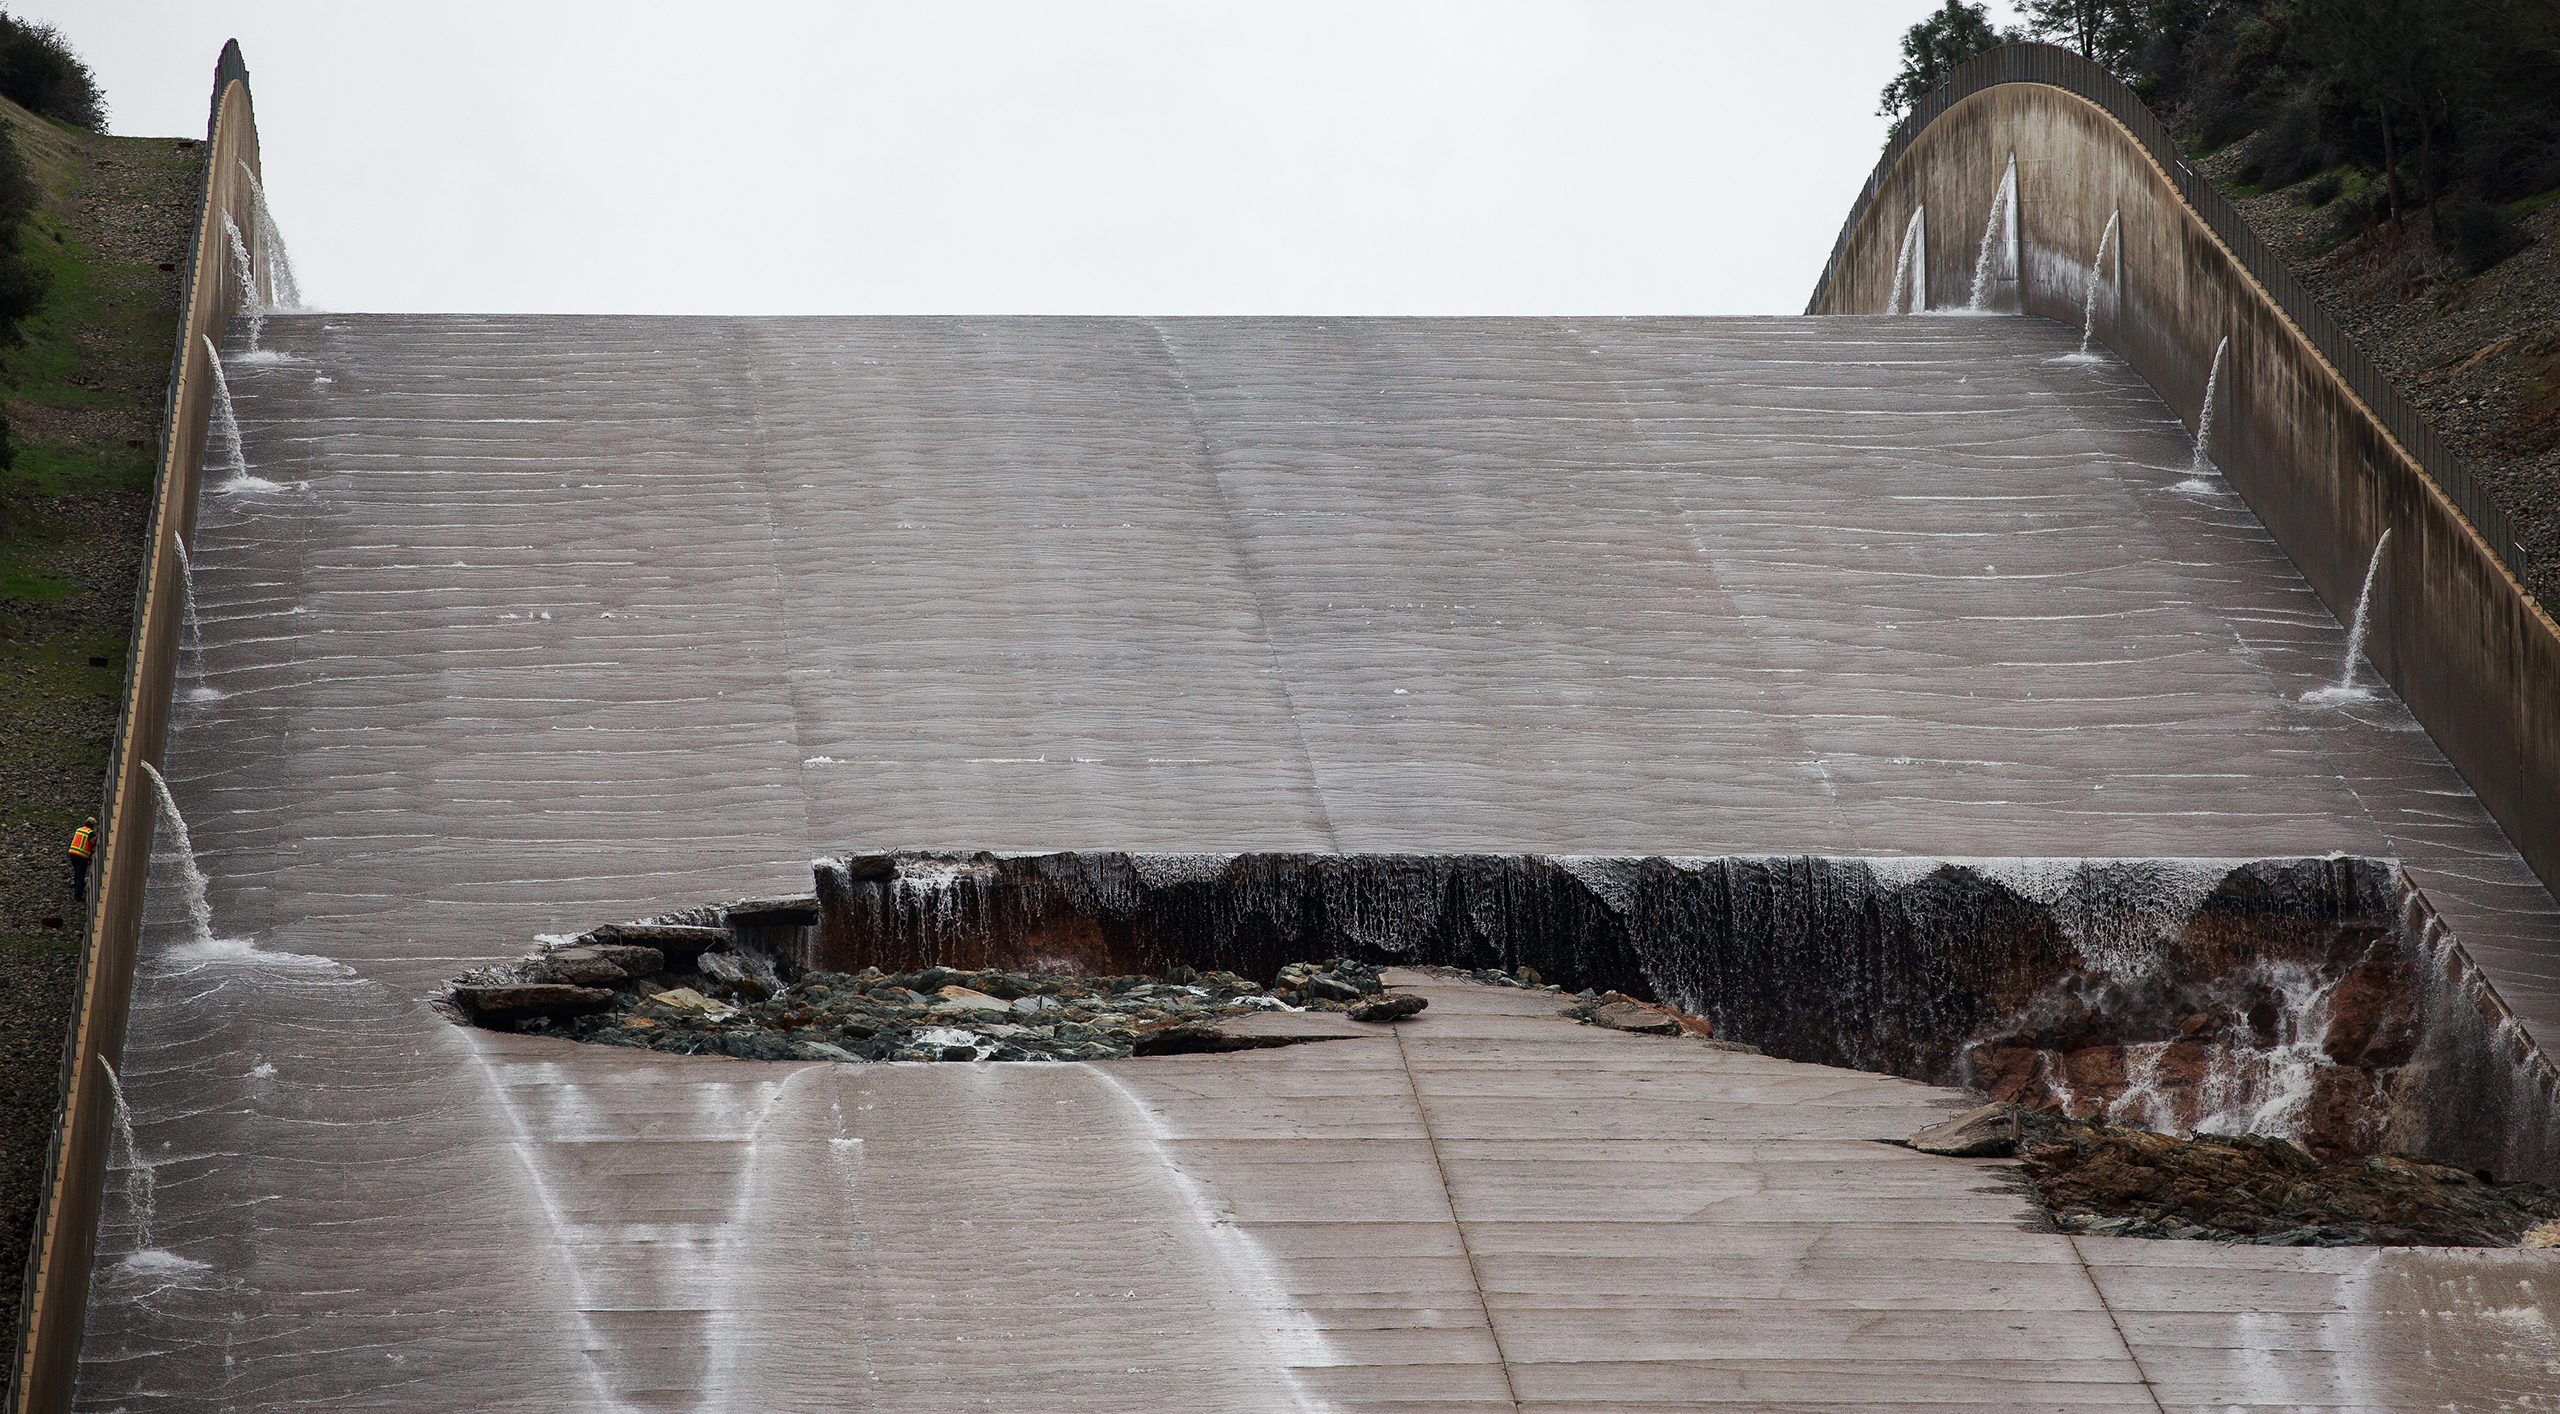 A hole was torn in the spillway of the Oroville Dam while releasing approximately 60,000 cubic-feet-second of water in advance of more rain on Feb. 7, 2017 in Oroville, Calif. (Max Whittaker—Prime)